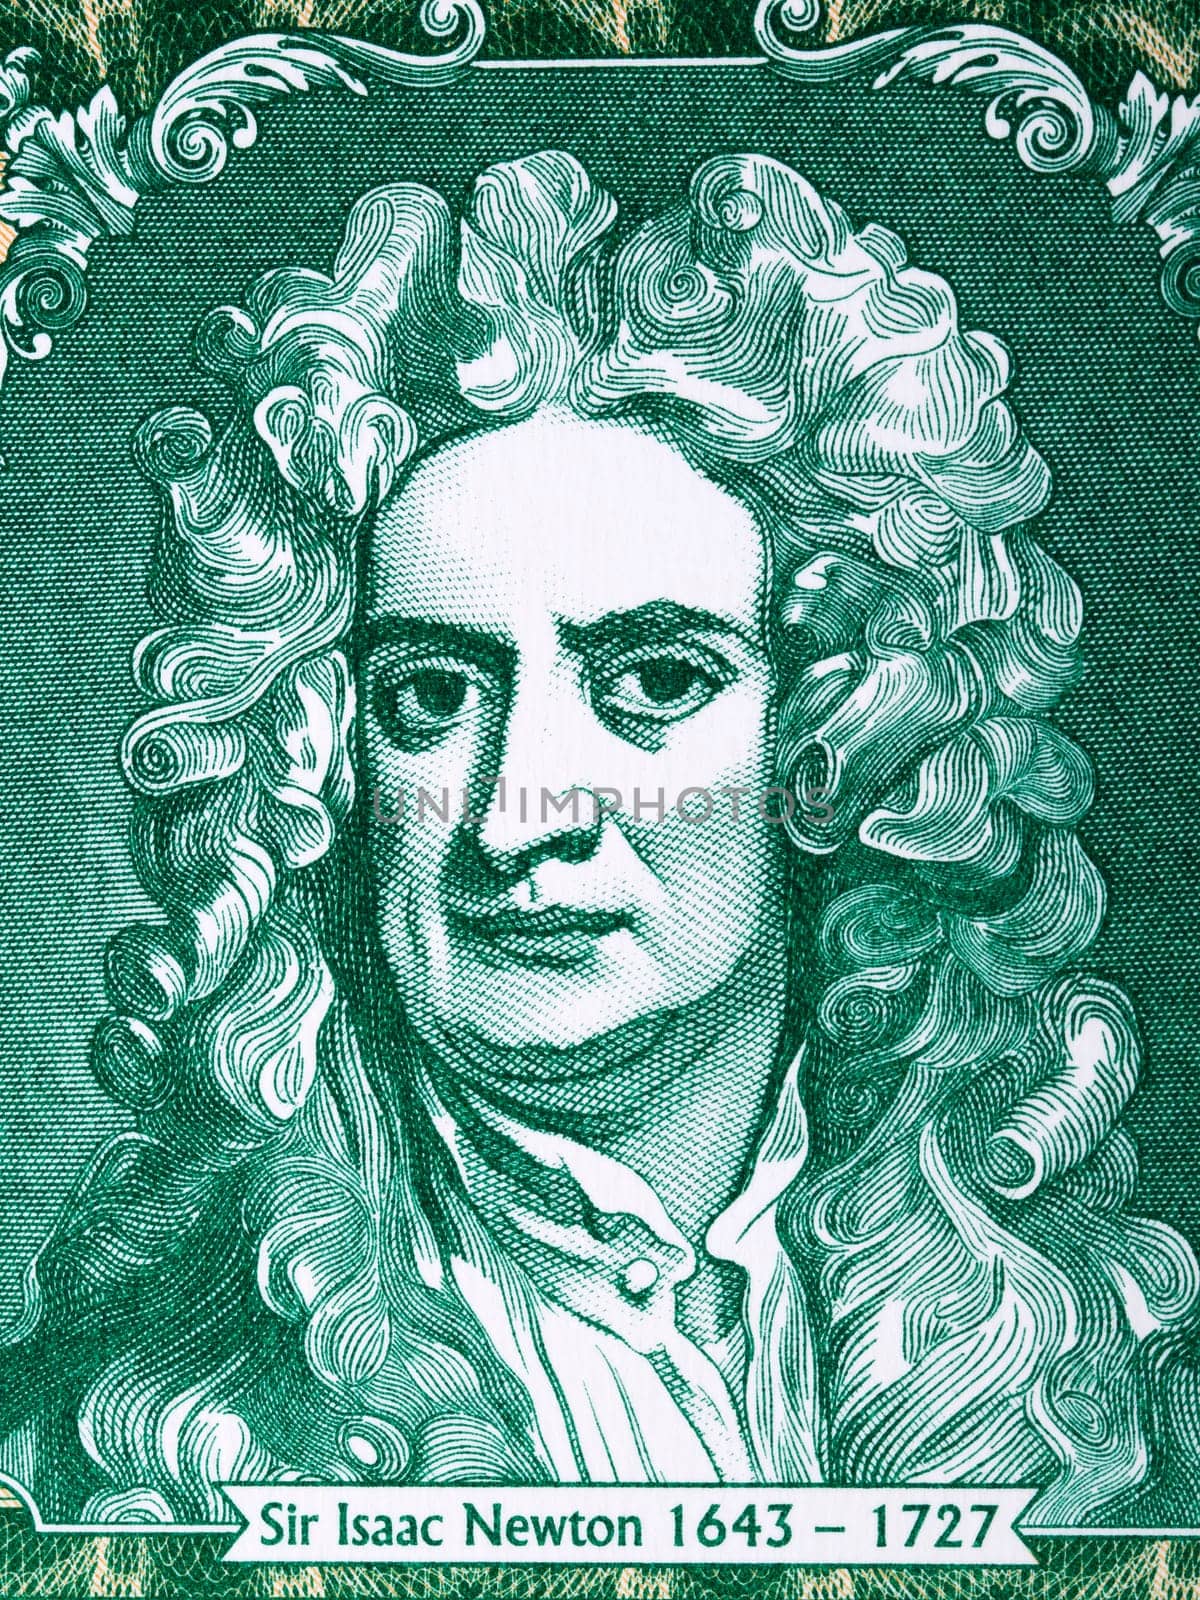 Isaac Newton a portrait from money by johan10